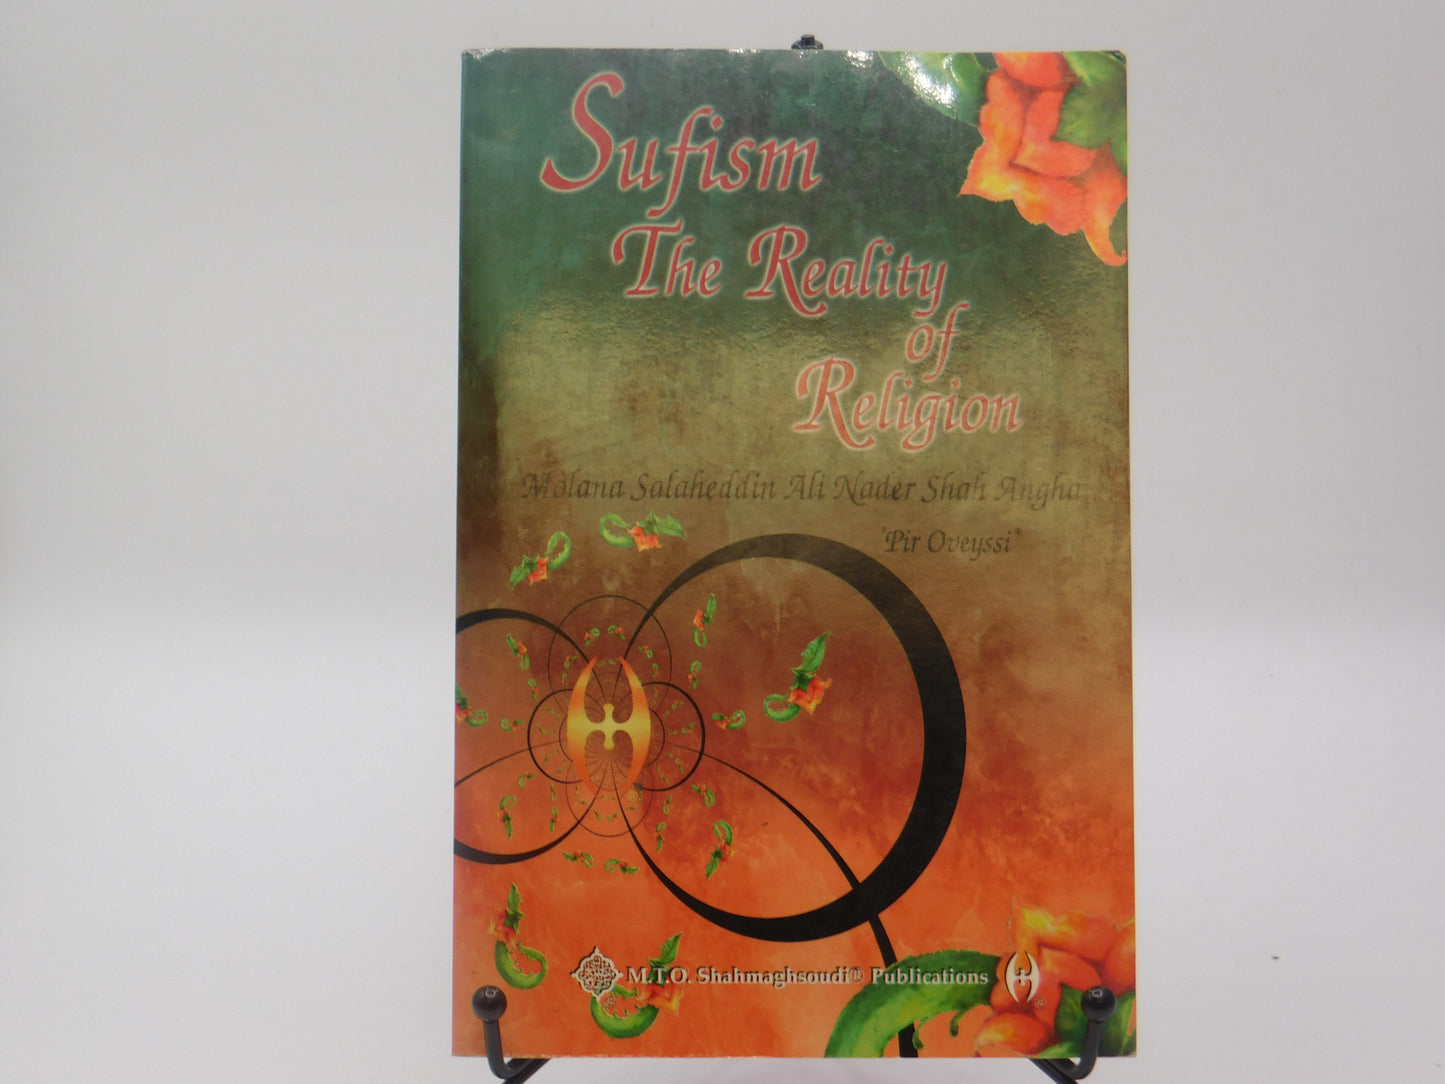 Sufism The Reality of Religion by Molana Salaheddin Ali Nader Shah Angha